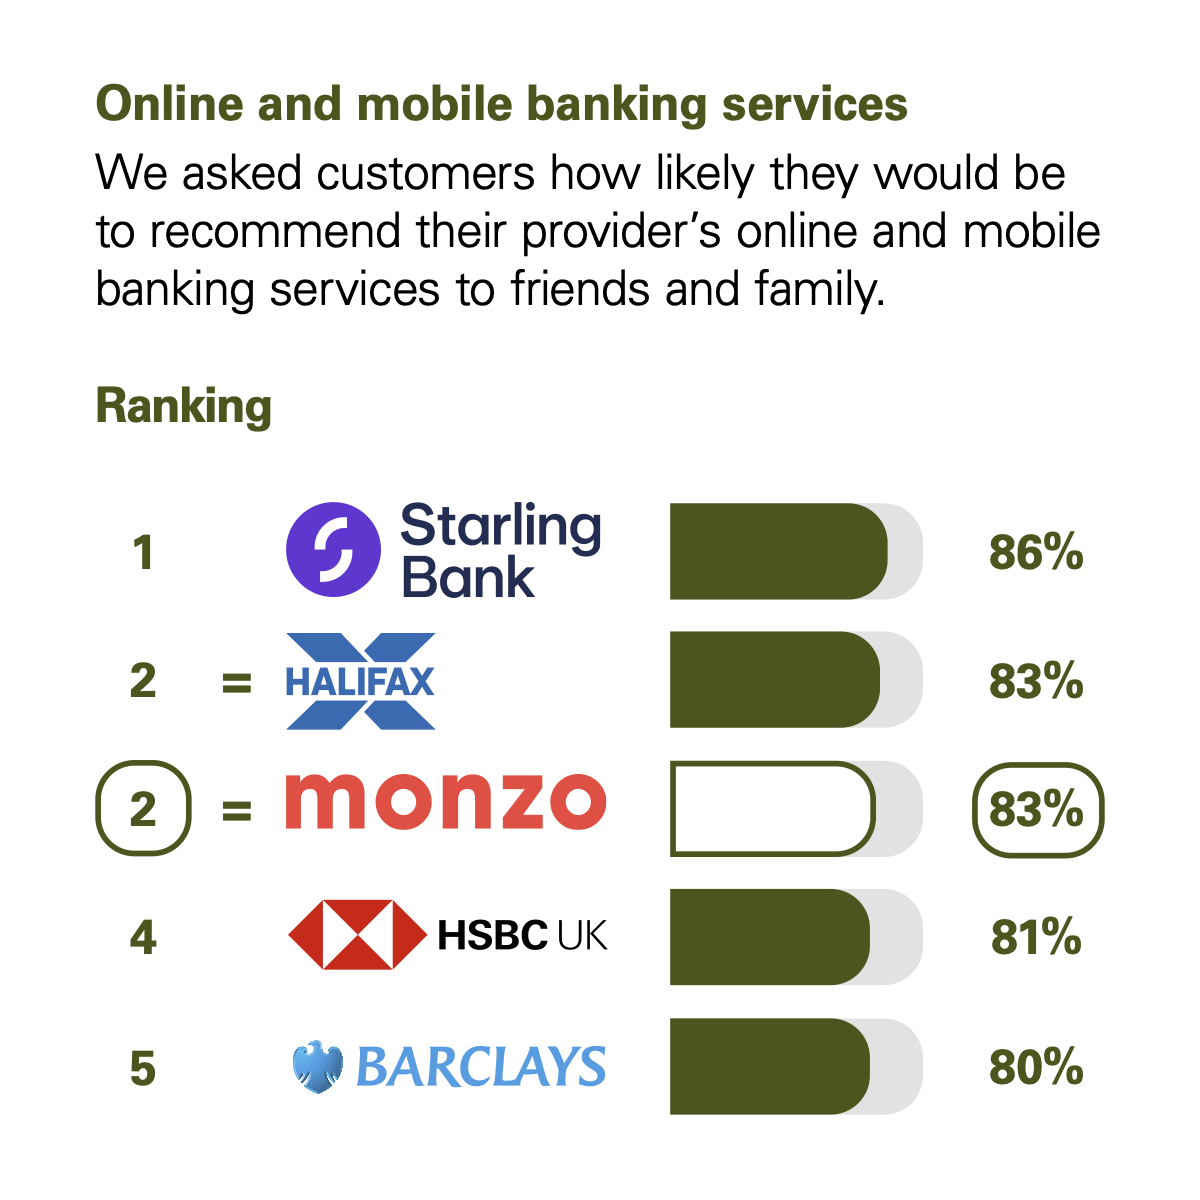 Graph showing the results of the CMA scoring of UK banks in the Online and Mobile Banking Services category. The CMA asked customers how likely they would be to recommend their provider's online and mobile banking services to friends and family. The rankings with percentage scores are: 1st Starling Bank with 86%. Joint 2nd are Halifax with 83% and Monzo with 83%. 4th HSBC with 81%. 5th Barclays with 80%.